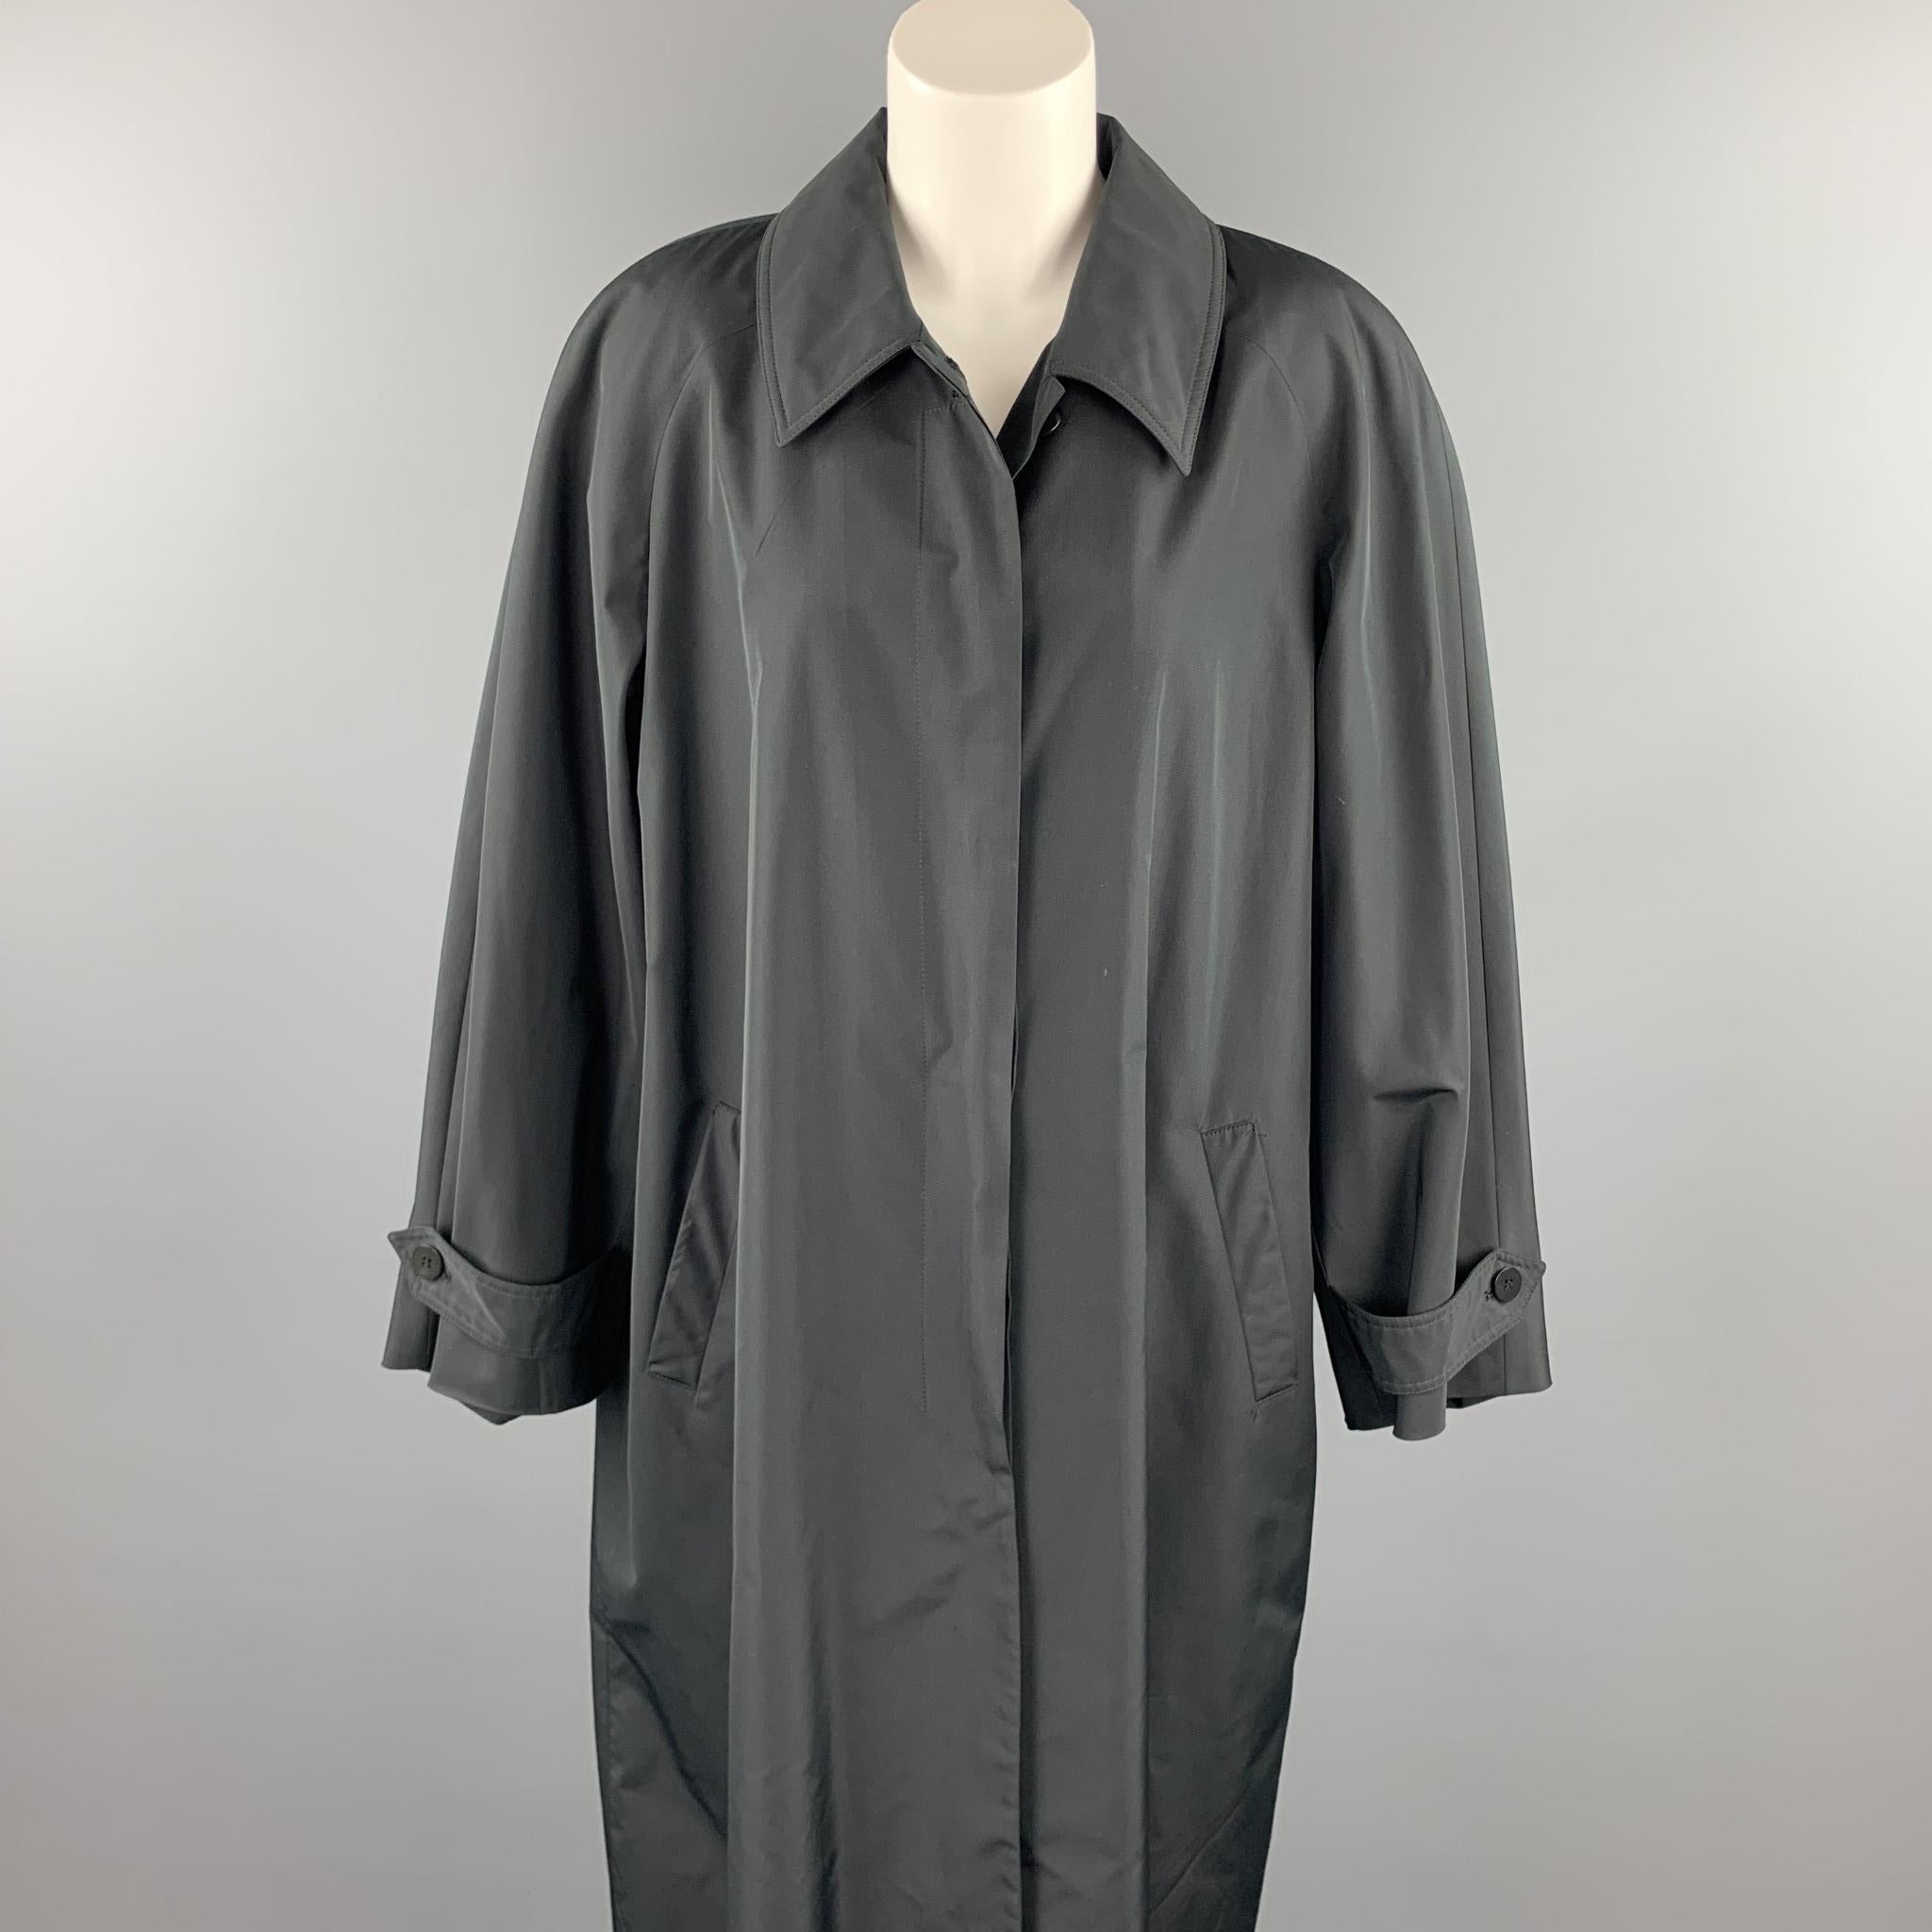 JOAN & DAVID long coat comes in a black polyester / silk with a full liner featuring a spread collar, slit pockets, and a hidden button closure. Made in Italy.

Very Good Pre-Owned Condition.
Marked: 42/8

Measurements:

Shoulder: 19 in. 
Bust: 44